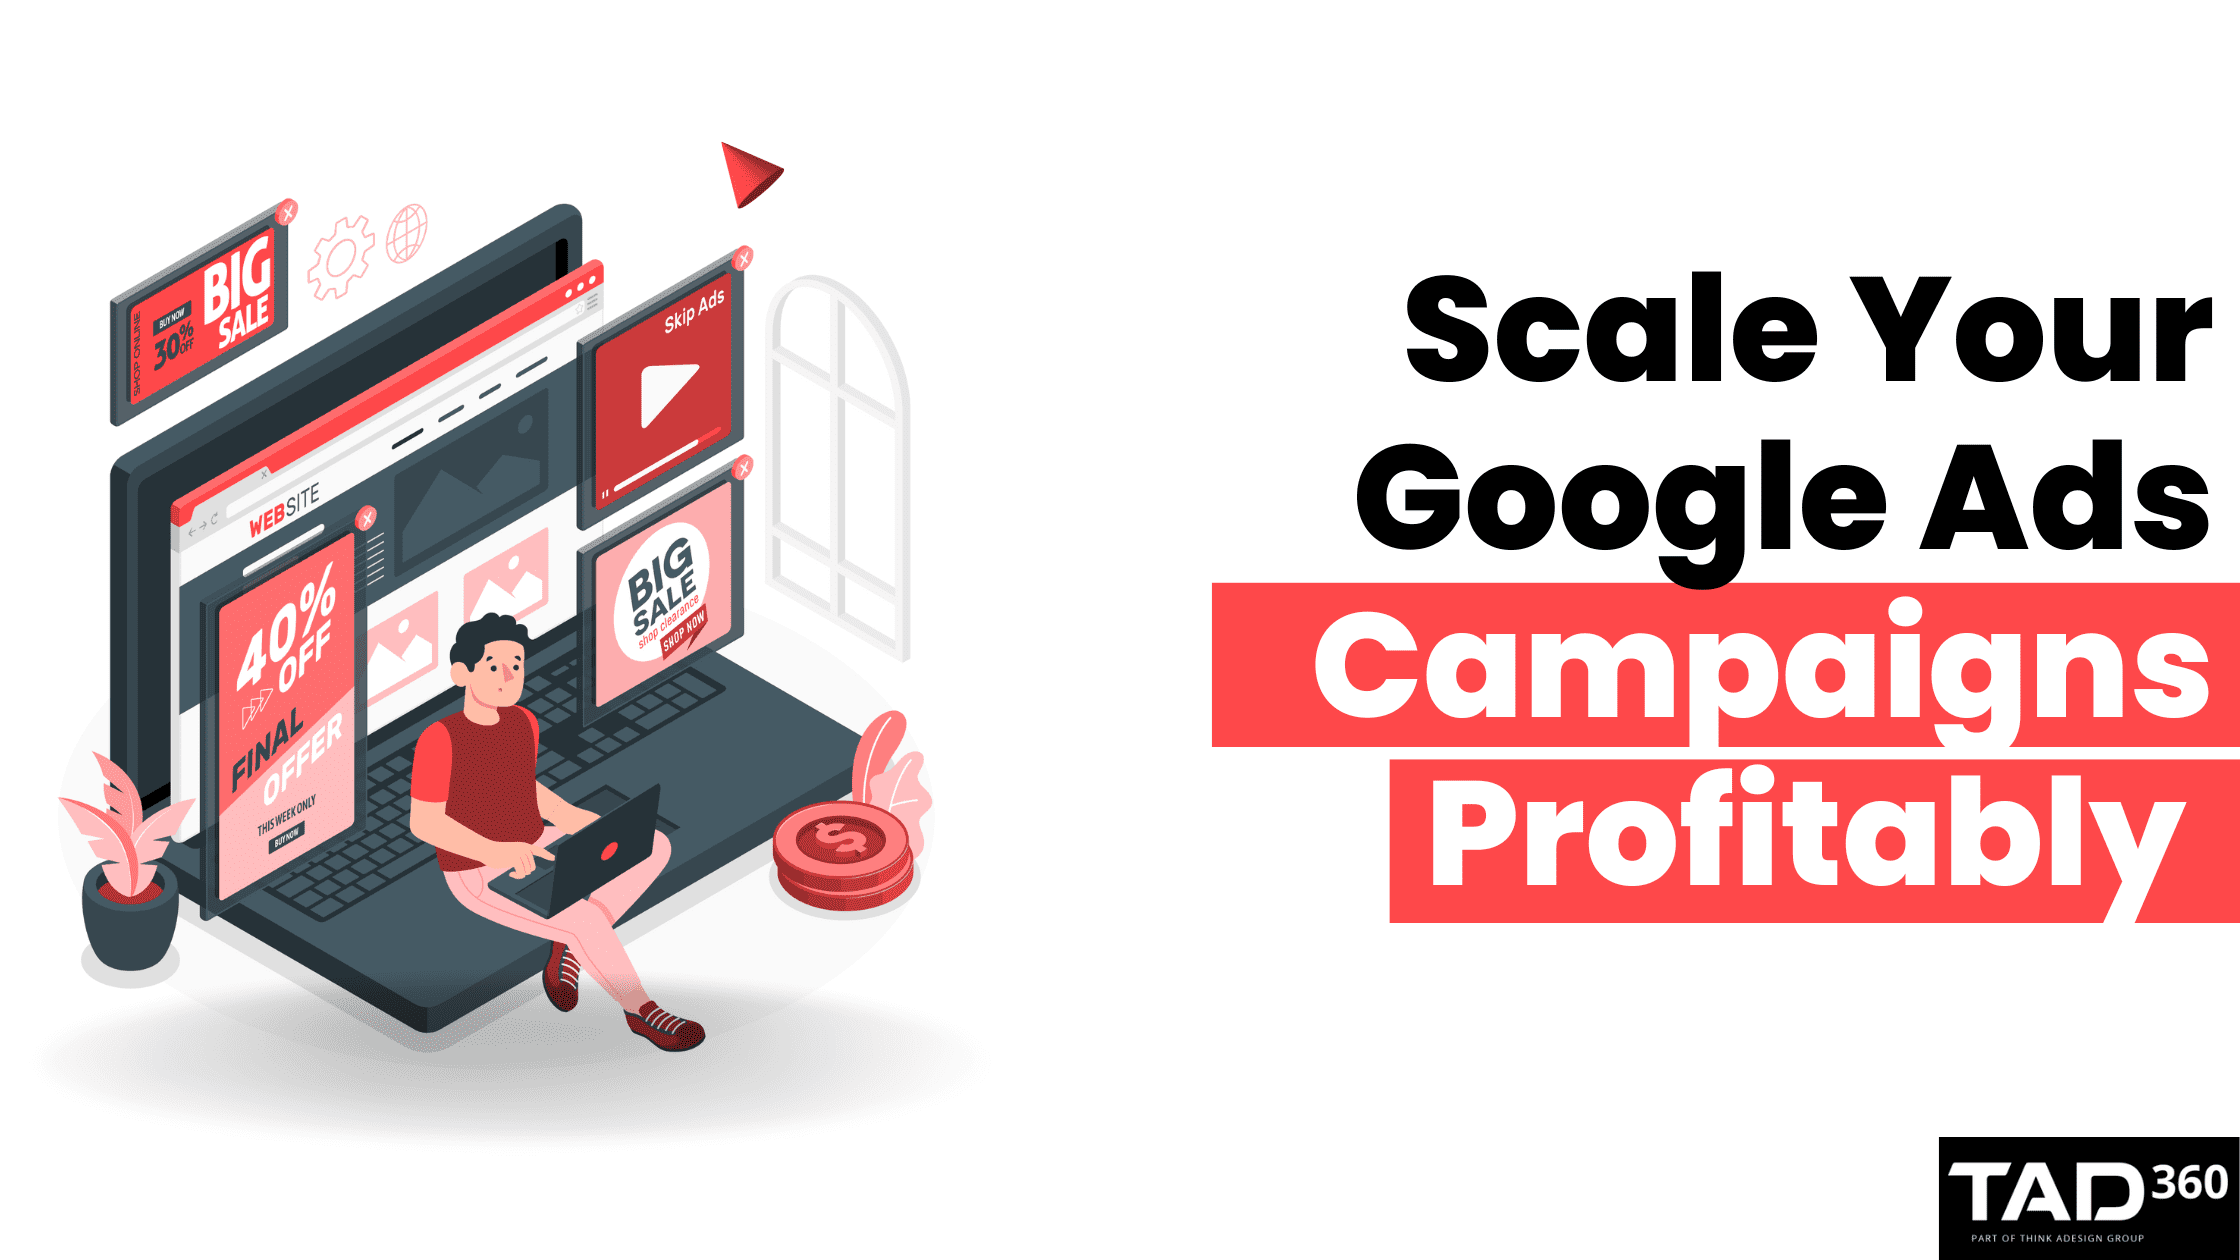 7 Google Ads tips That’ll Make Your Campaigns Scale Profitably